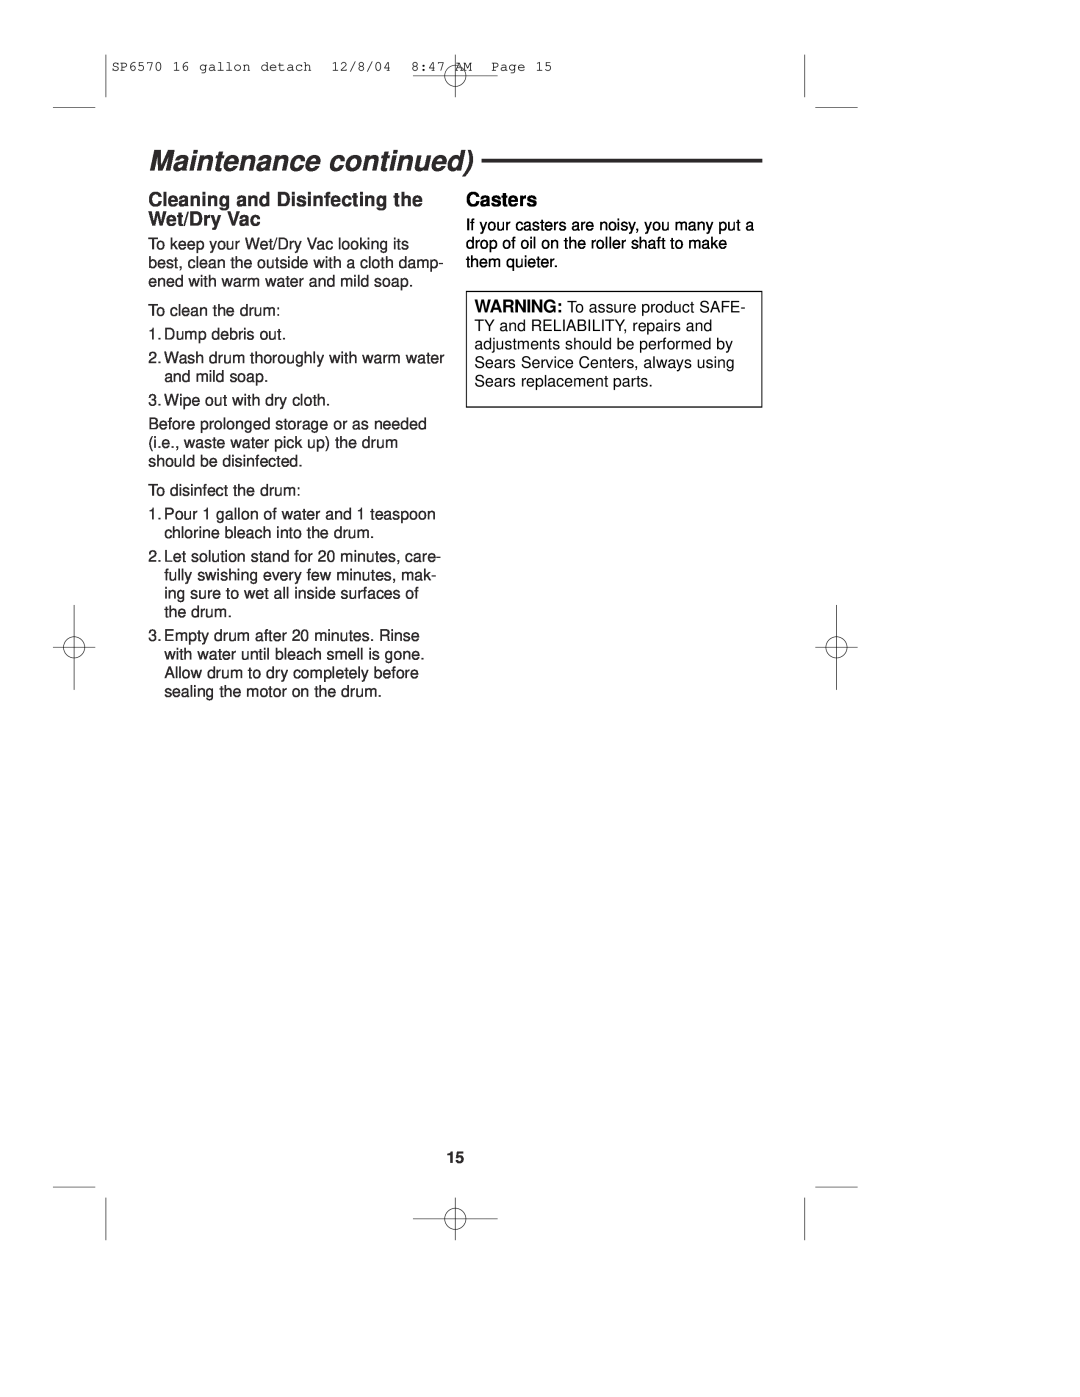 Sears 113.17066 owner manual Cleaning and Disinfecting the Wet/Dry Vac, Casters, Maintenance continued 